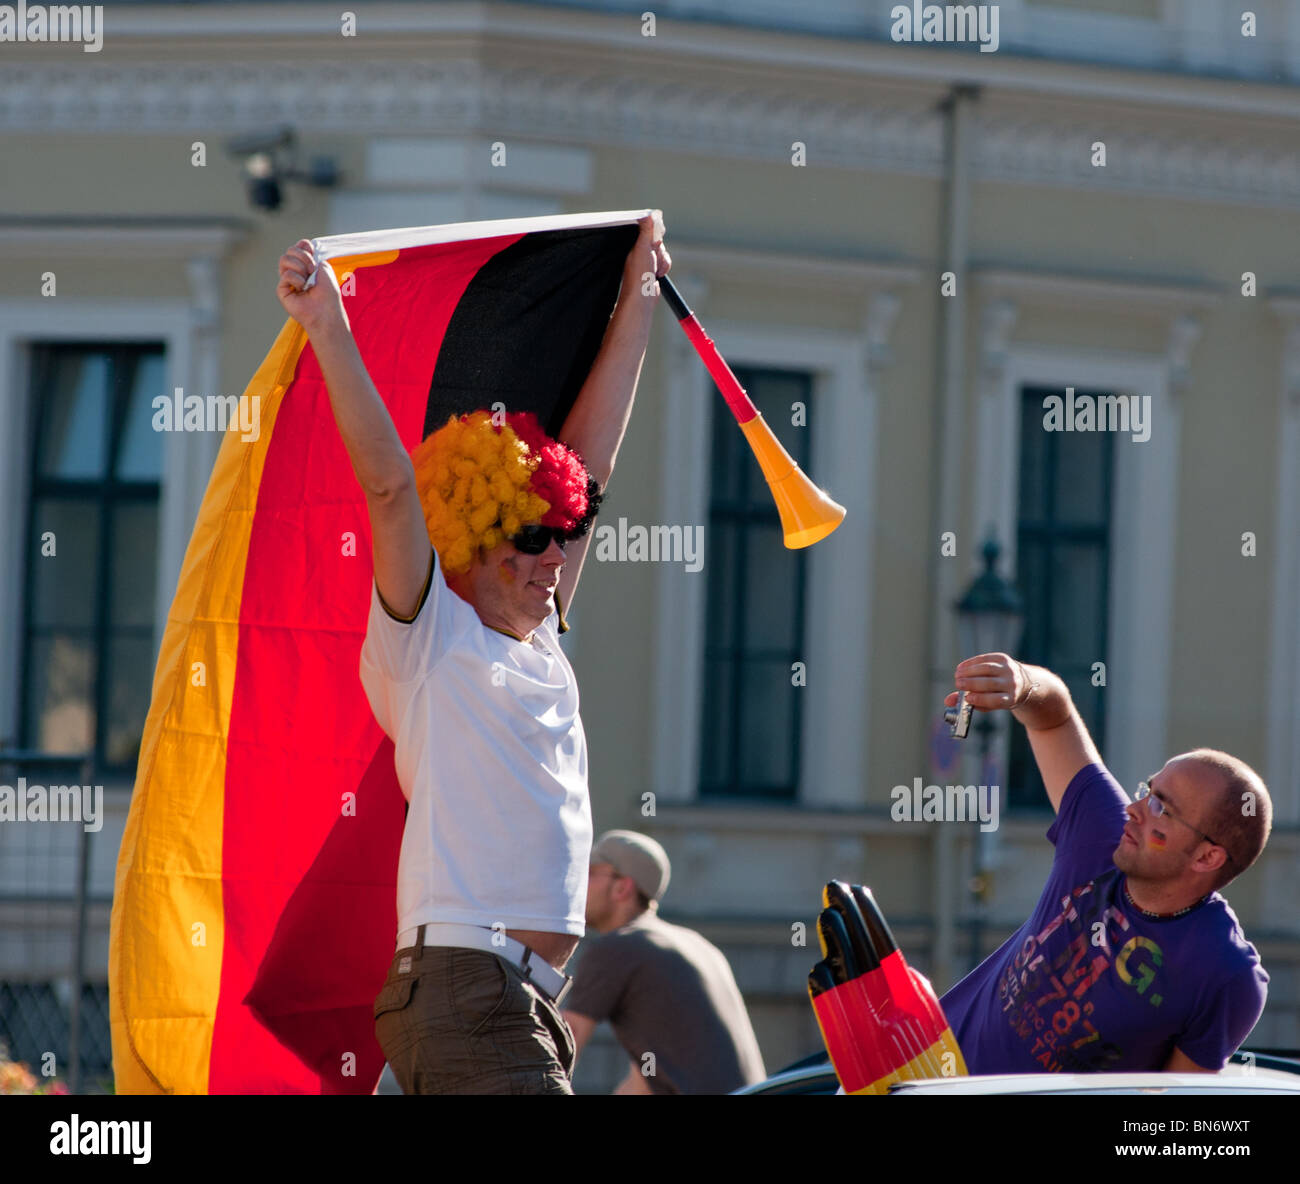 German football fans celebrating a win during the 2010 World cup Stock Photo